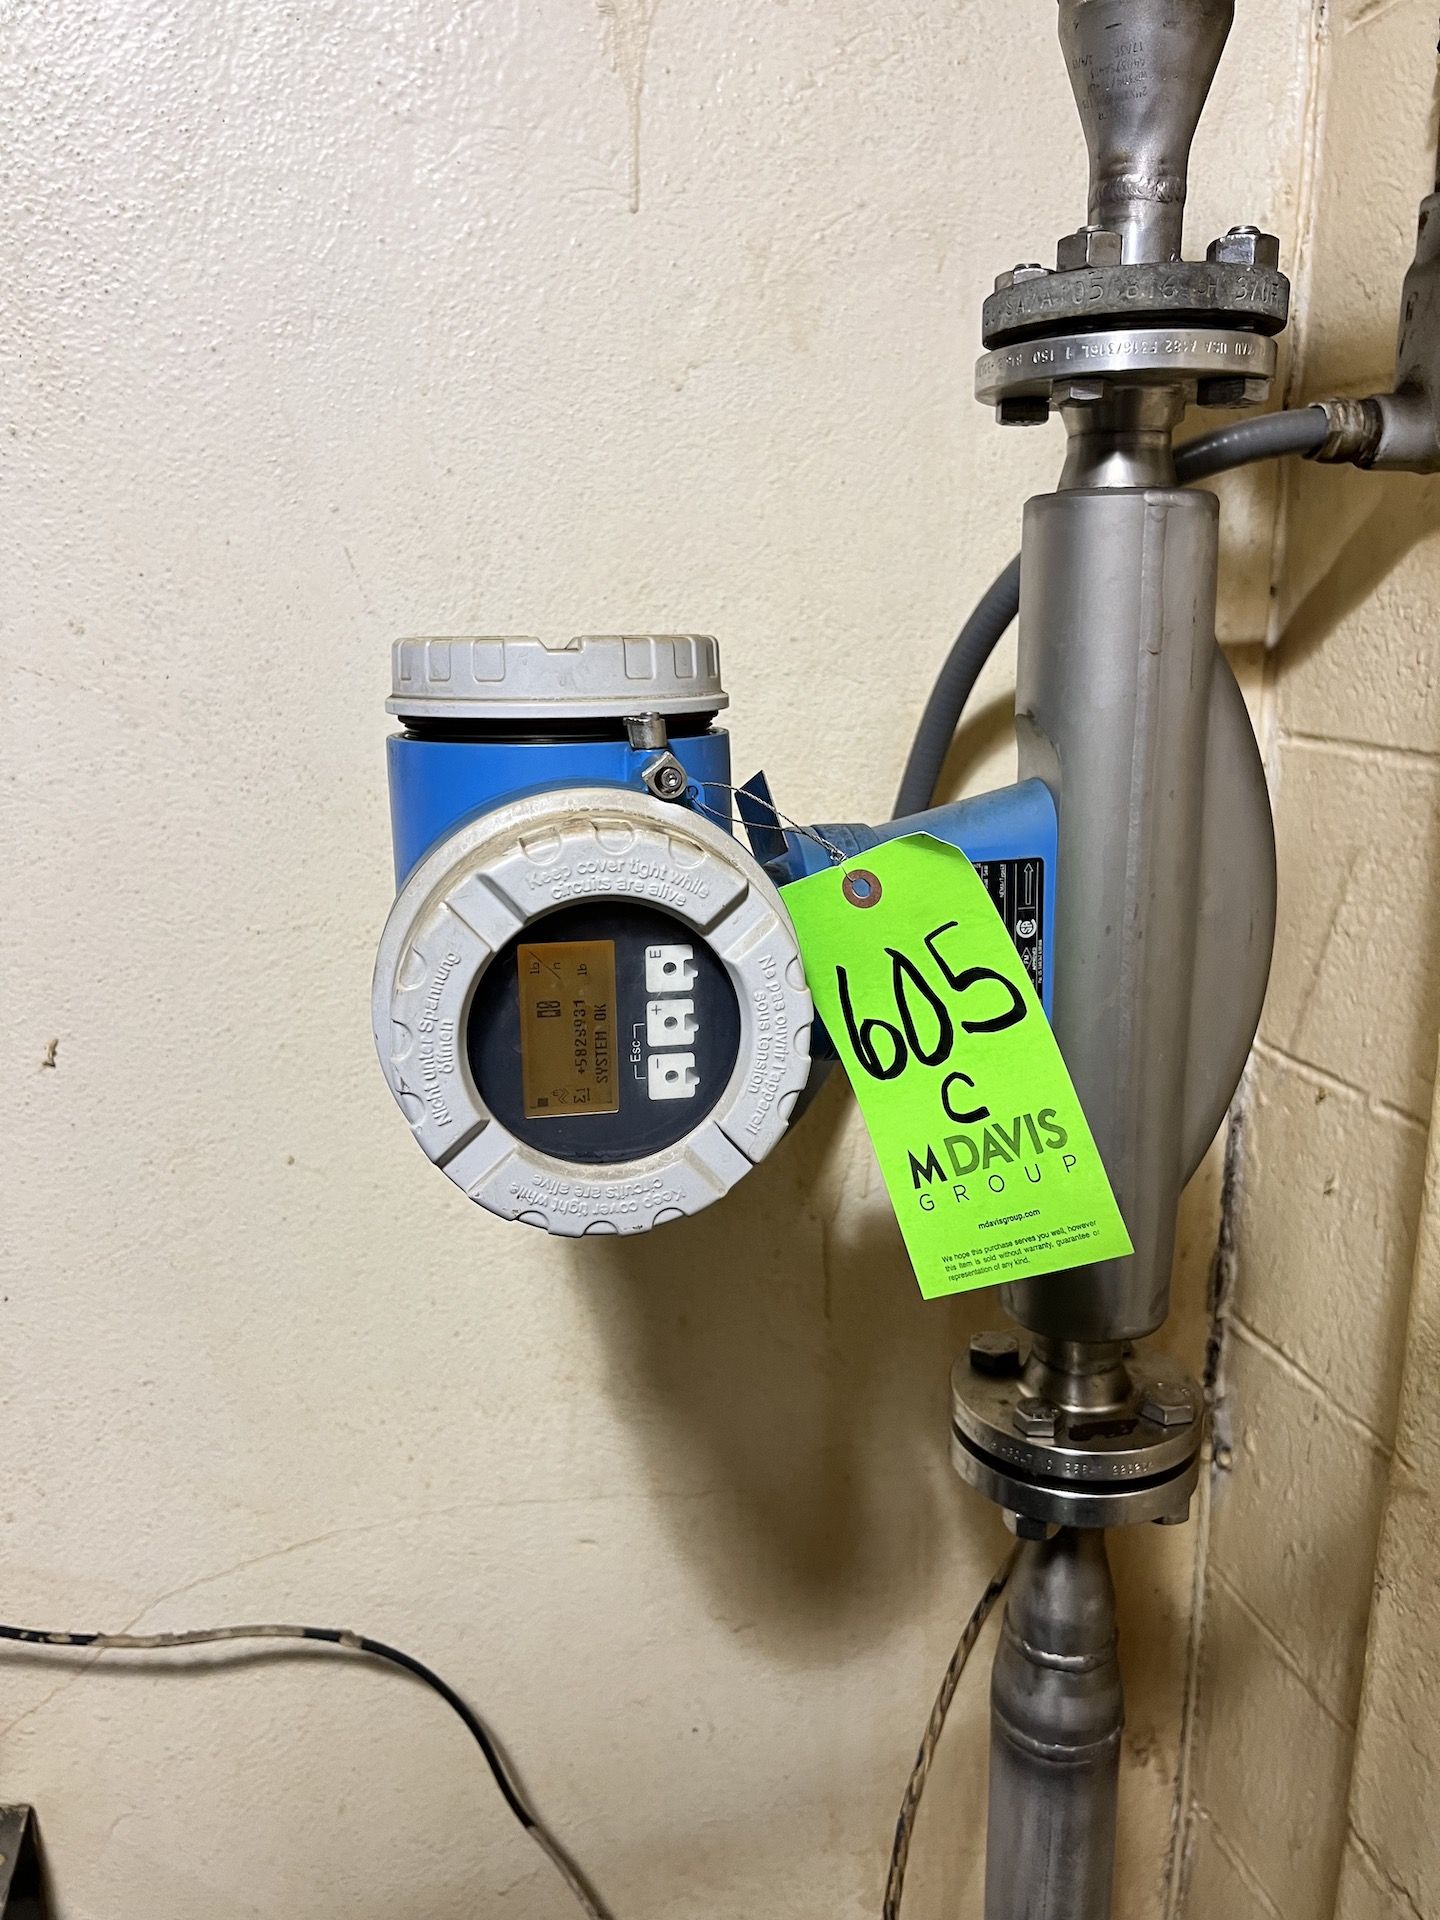 ENDRESS HAUSER PROMASS F FLOW METER WITH DIGITAL READOUT (SIMPLE LOADING FEE $110)